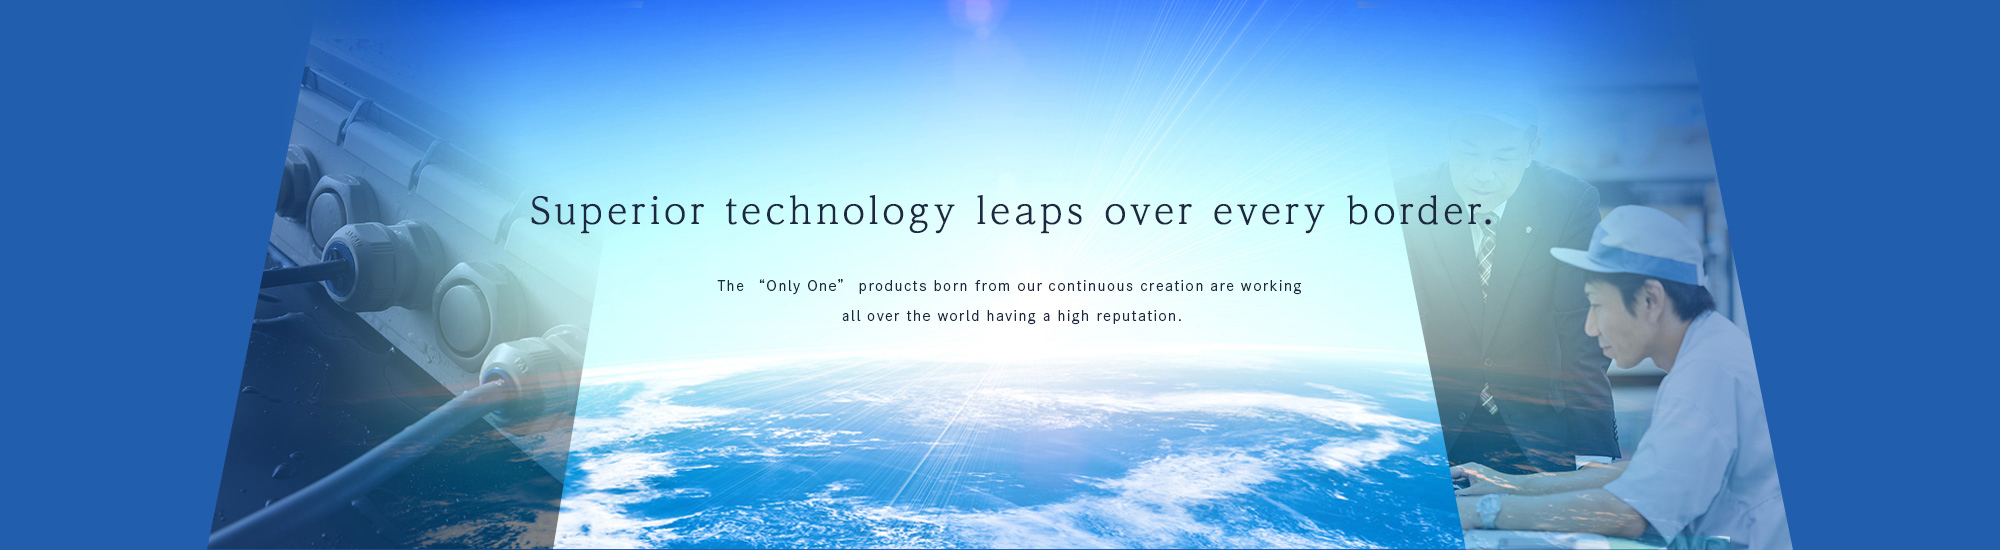 The “Only One” products born from our continuous creation are working all over the world having a high reputation.